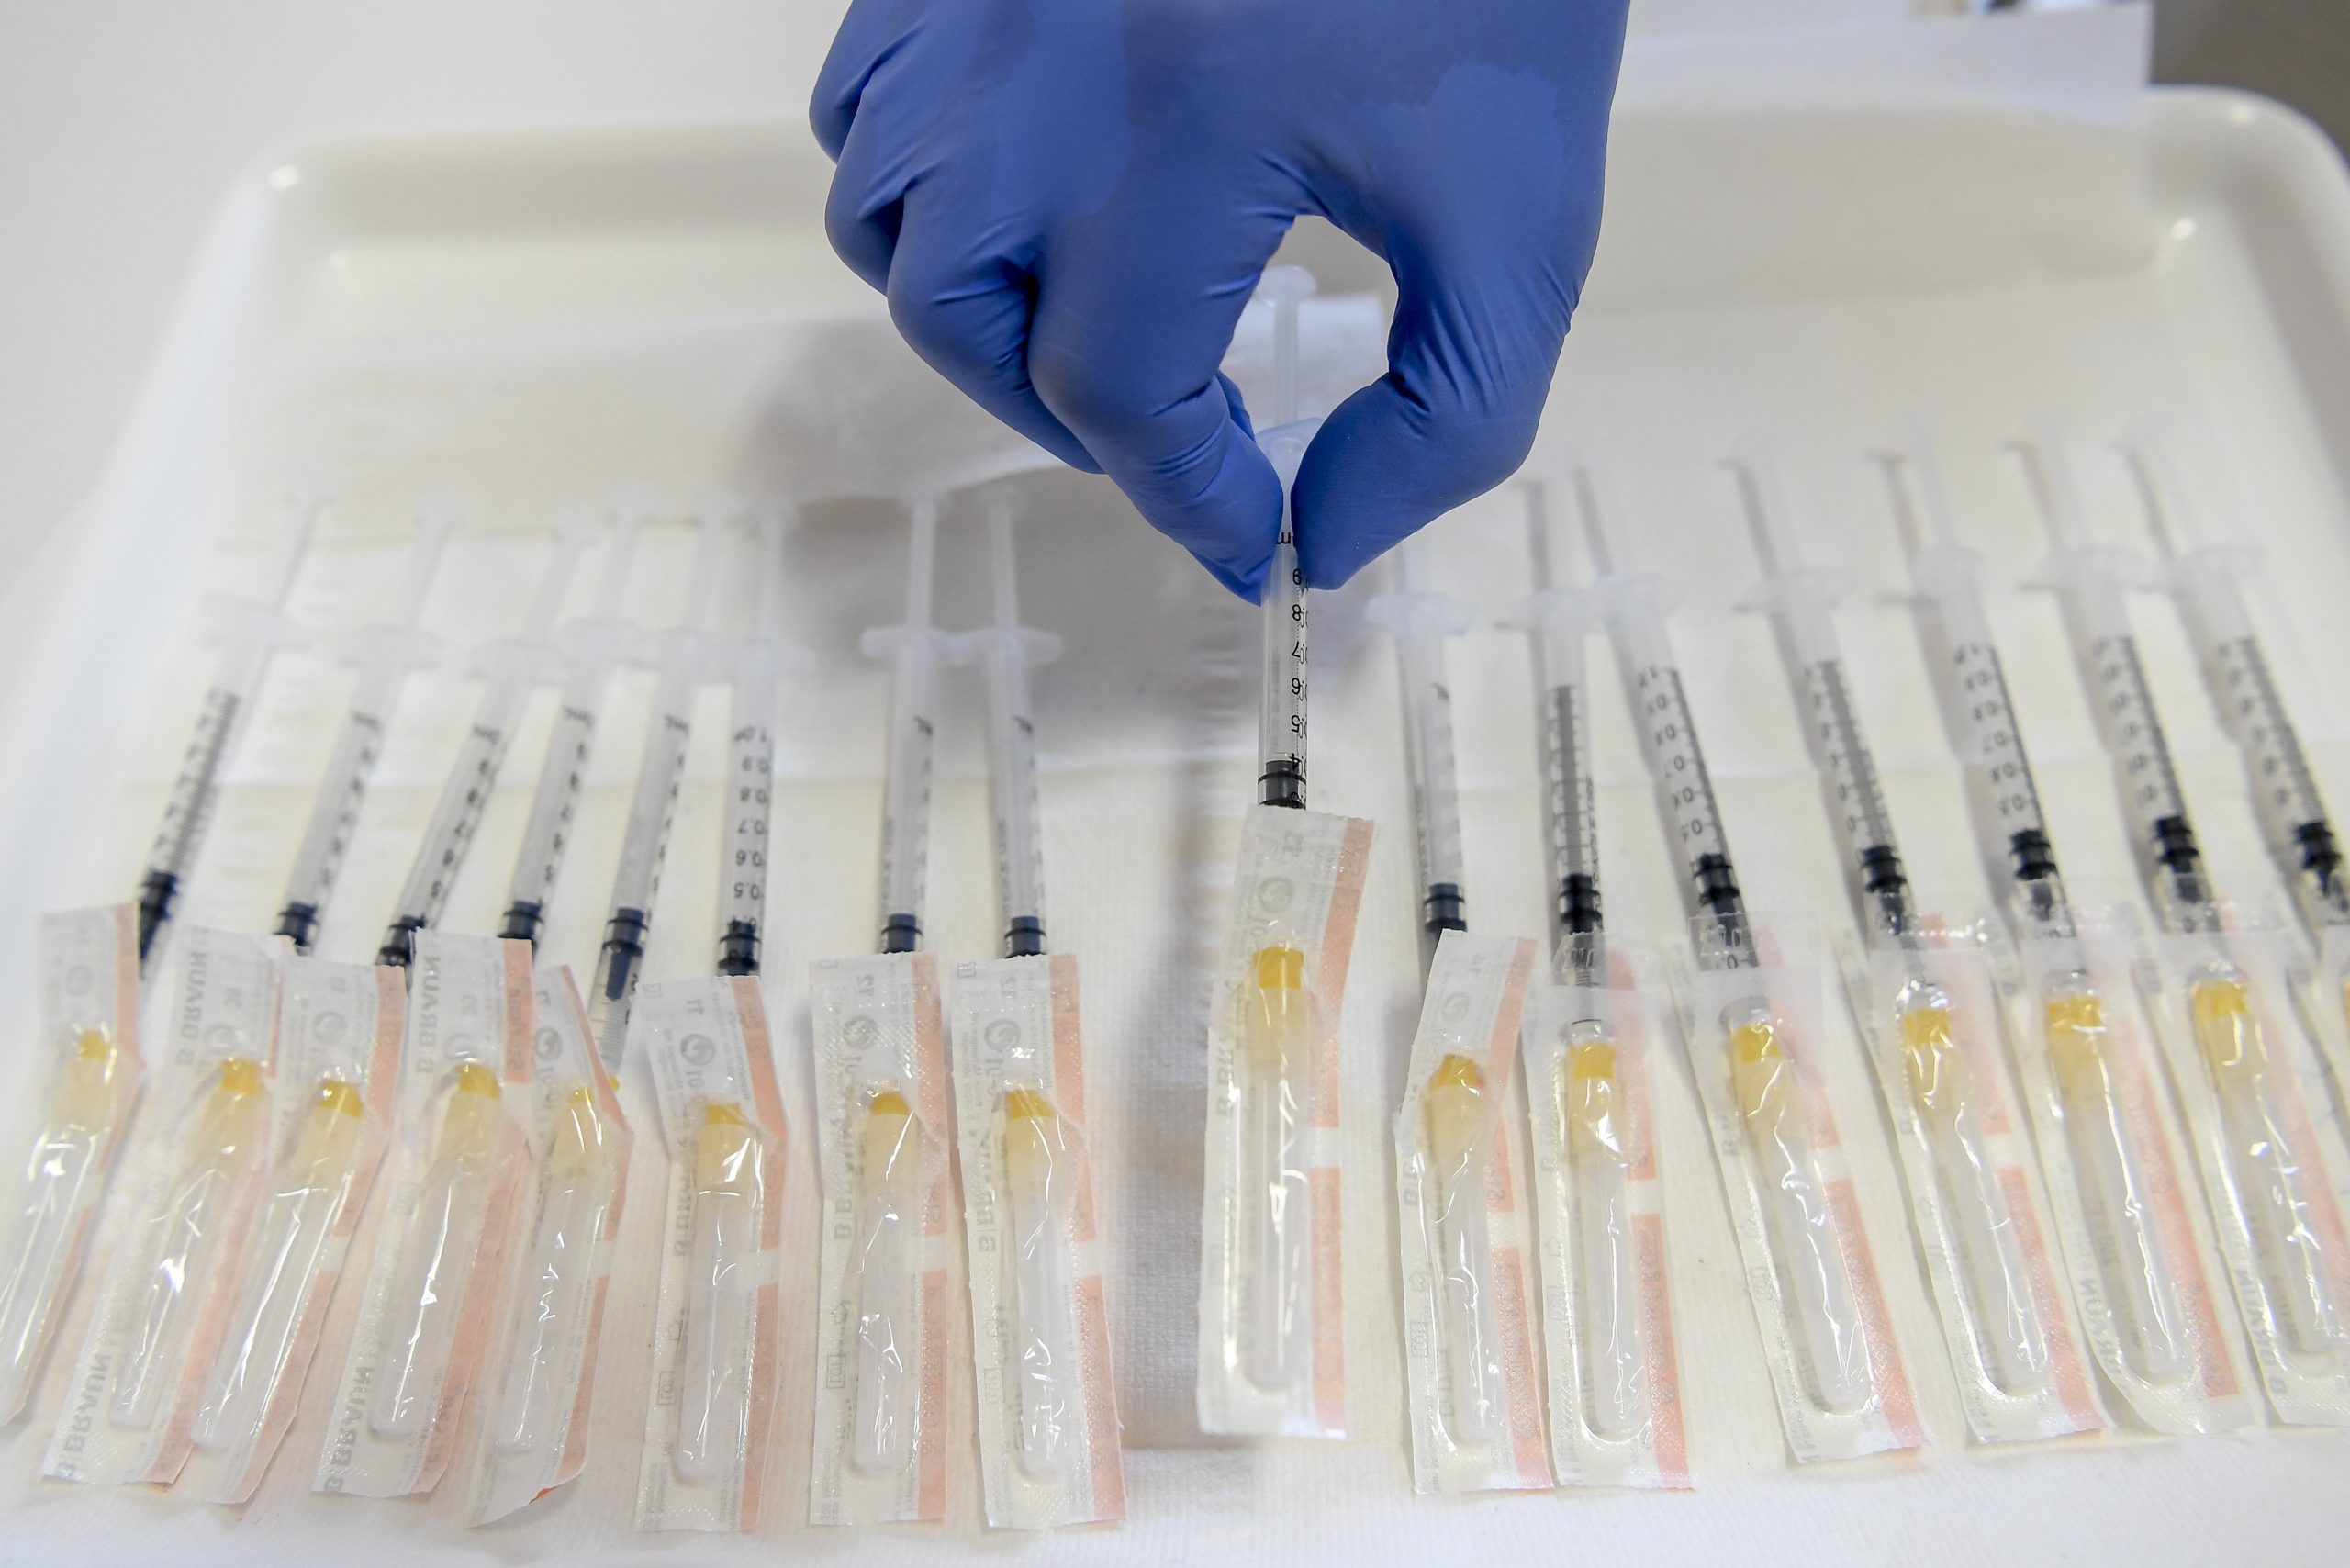 Hungary Delivers 100,000 Vaccines to Czech Republic